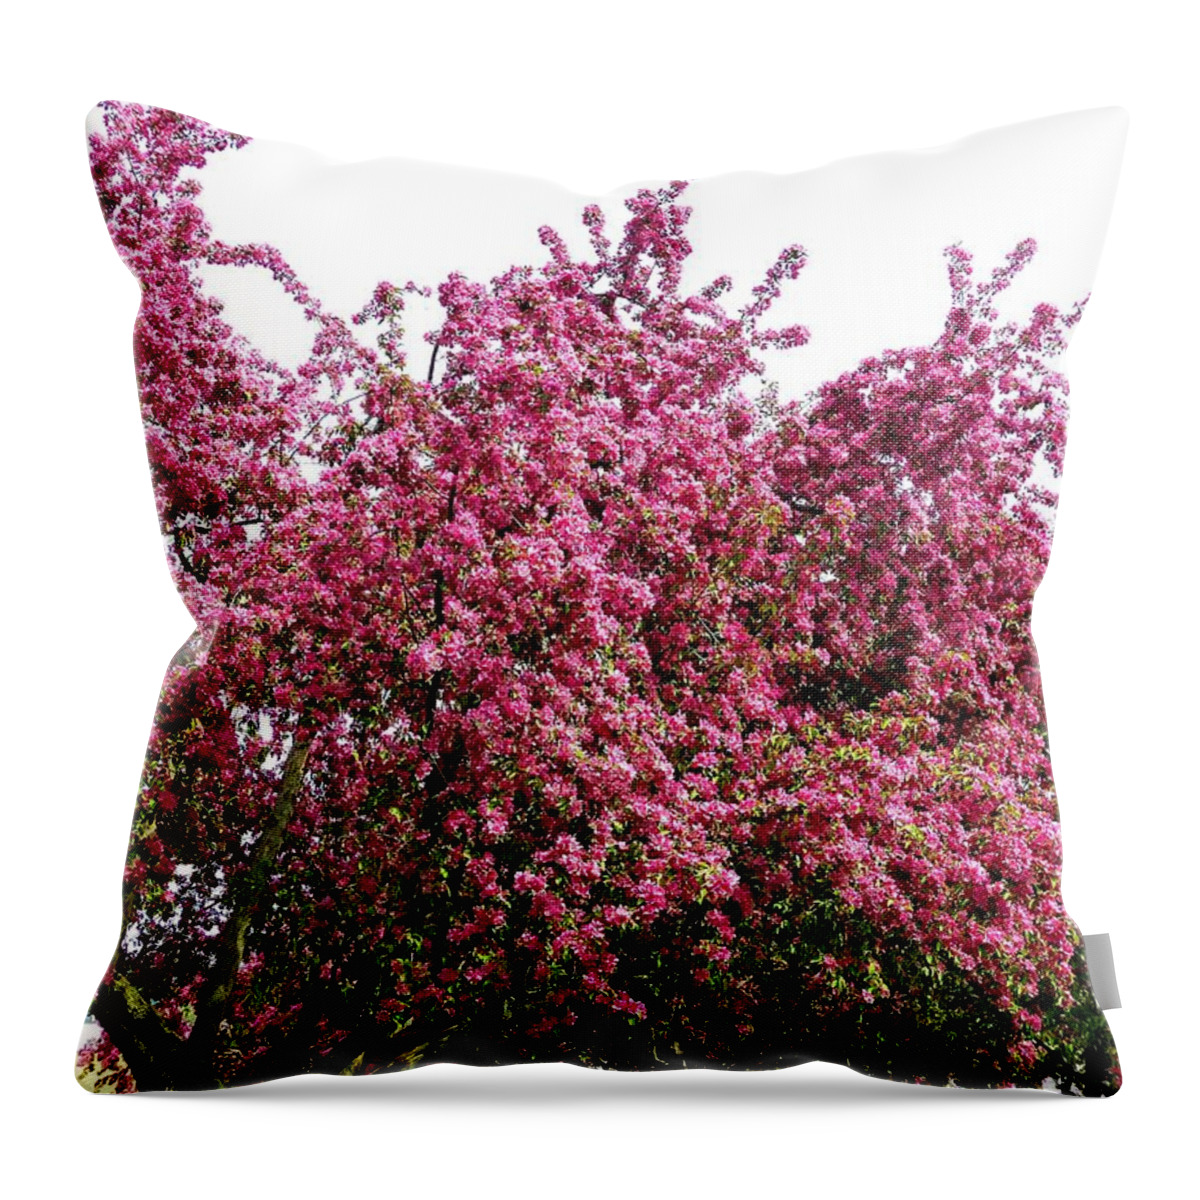 Cherry Blossoms Throw Pillow featuring the photograph Cherry Blossoms 2 by Will Borden